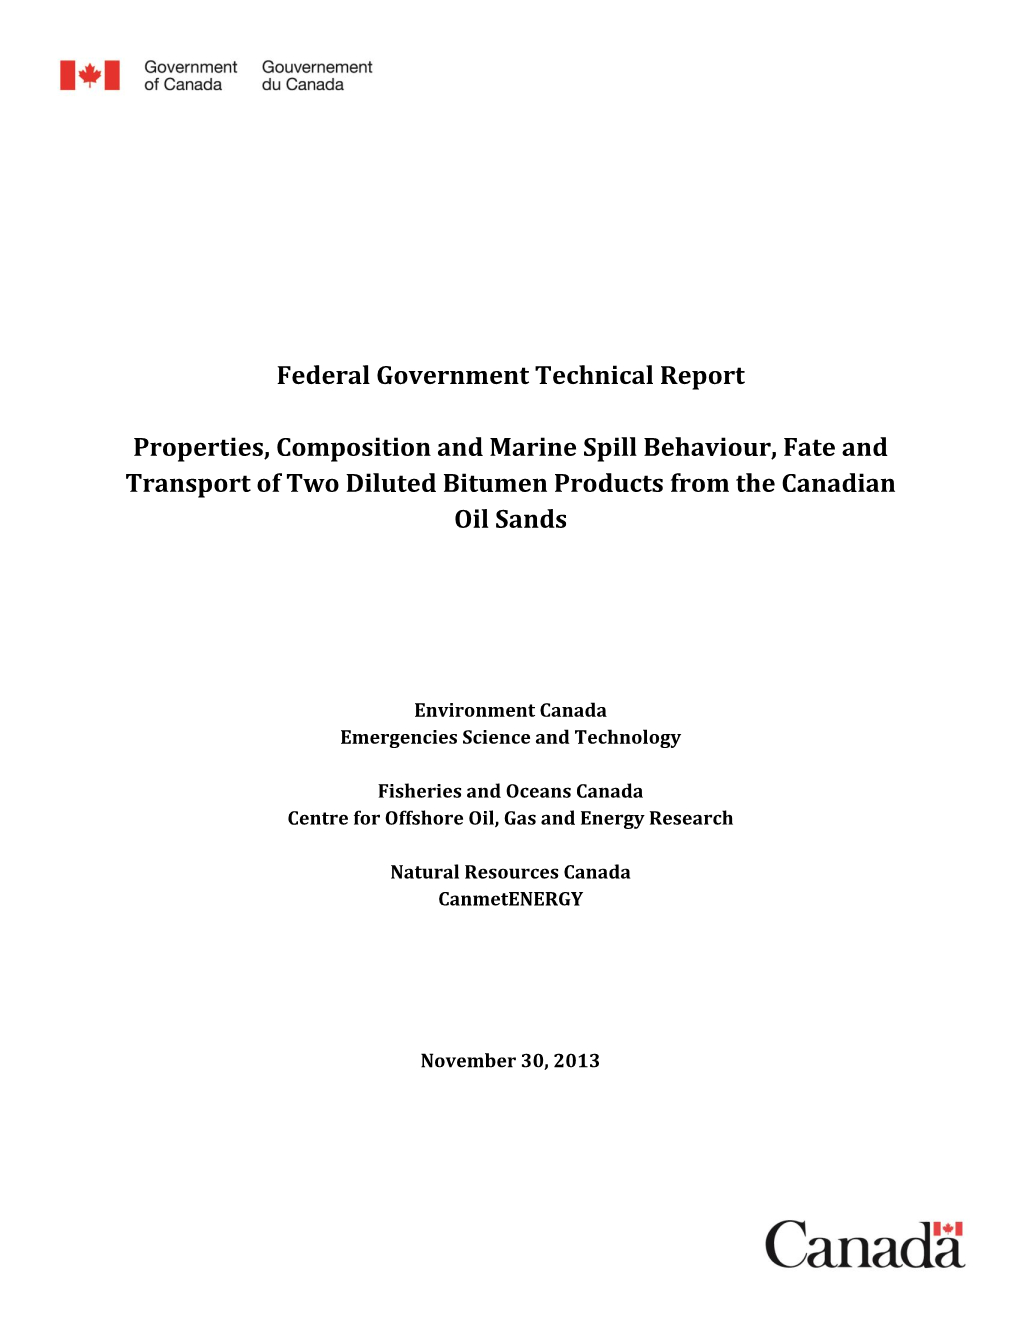 Federal Government Technical Report Properties, Composition And